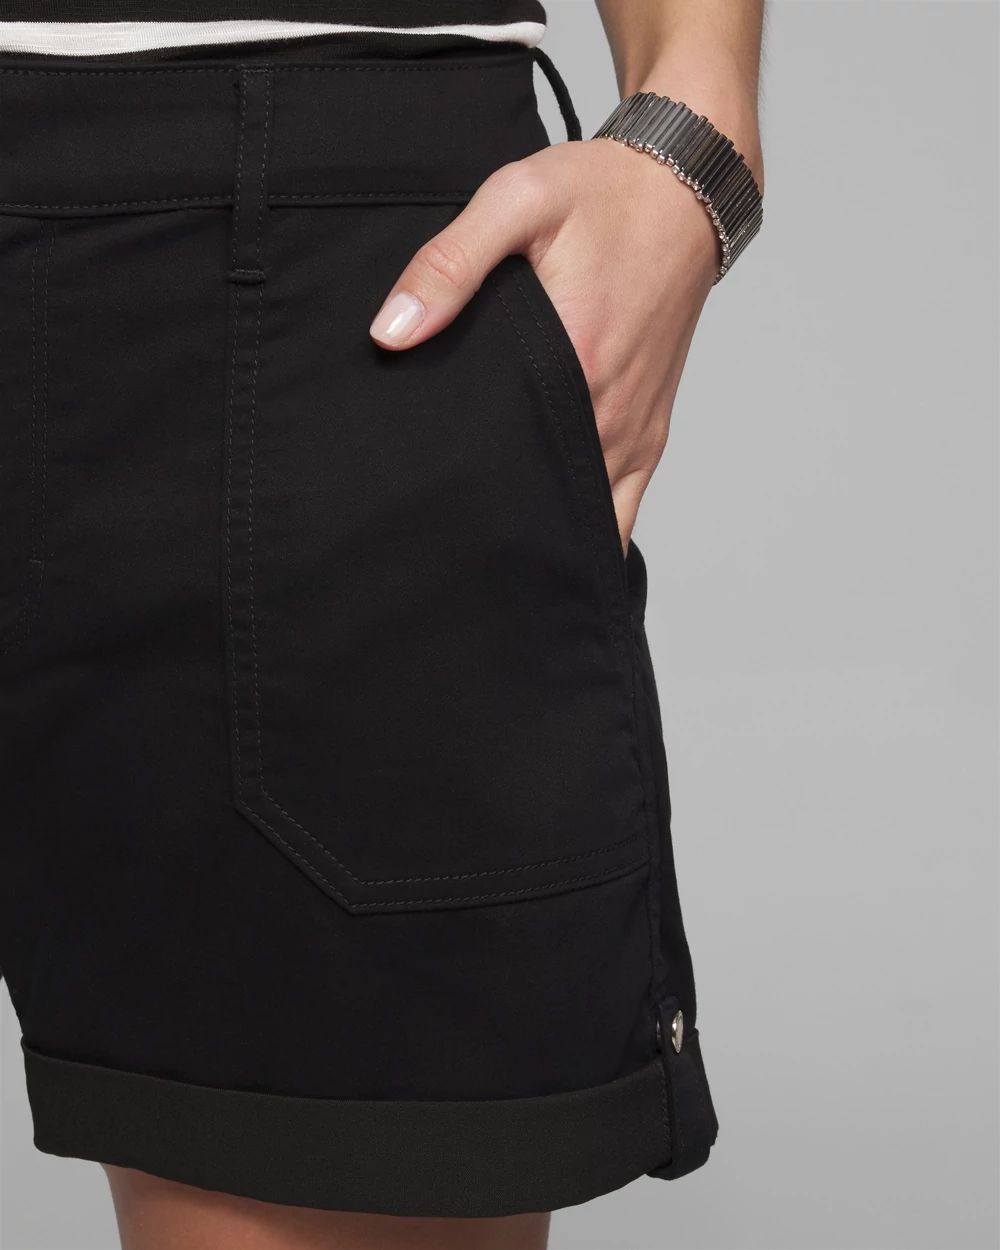 Outlet WHBM Utility Shorts